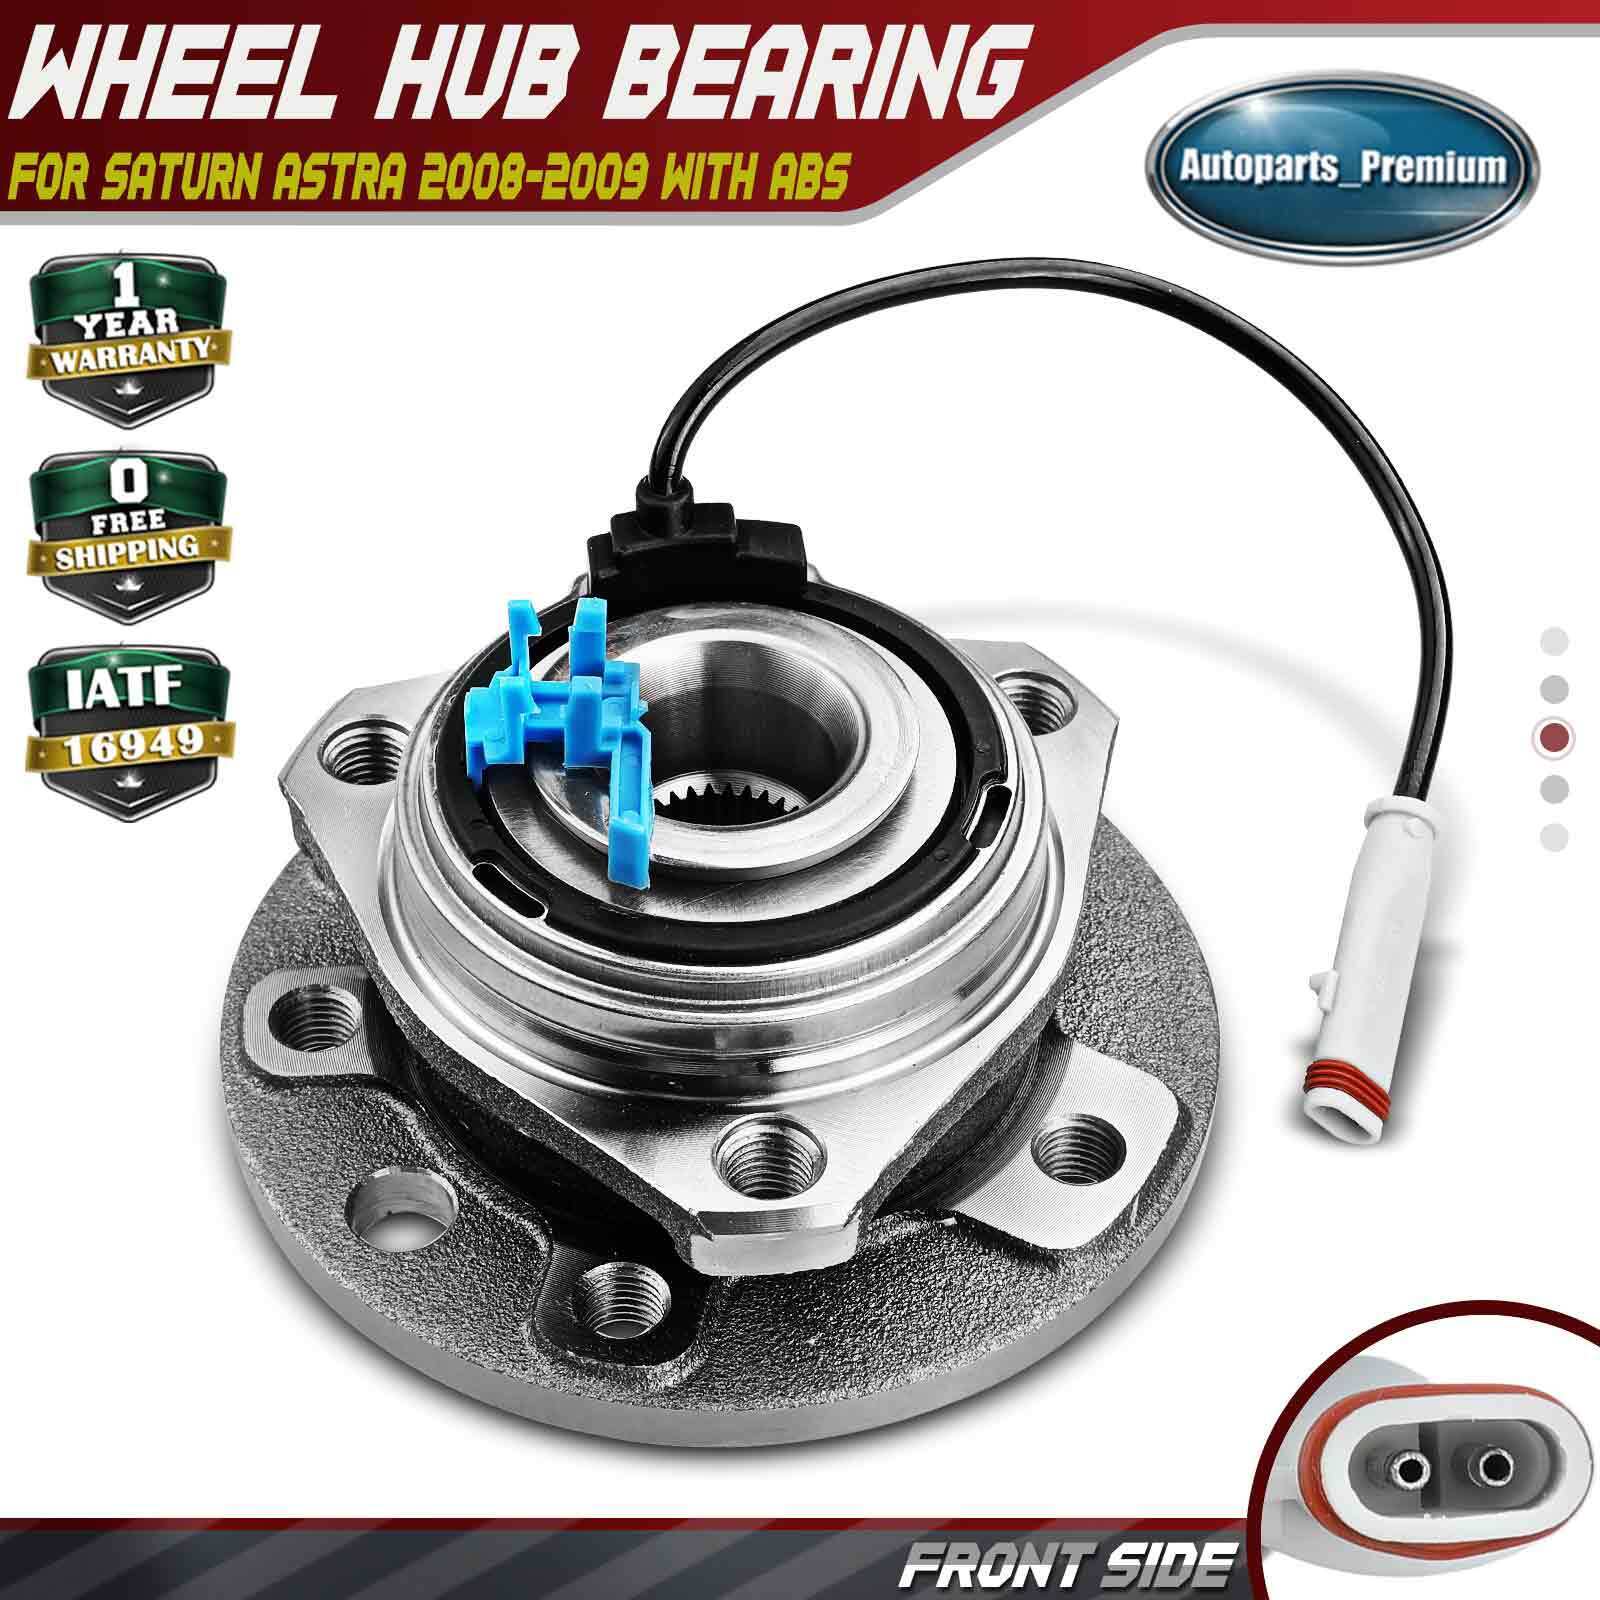 Front LH / RH Wheel Hub Bearing Assembly for Saturn Astra 2008-2009 1.8L w/ ABS